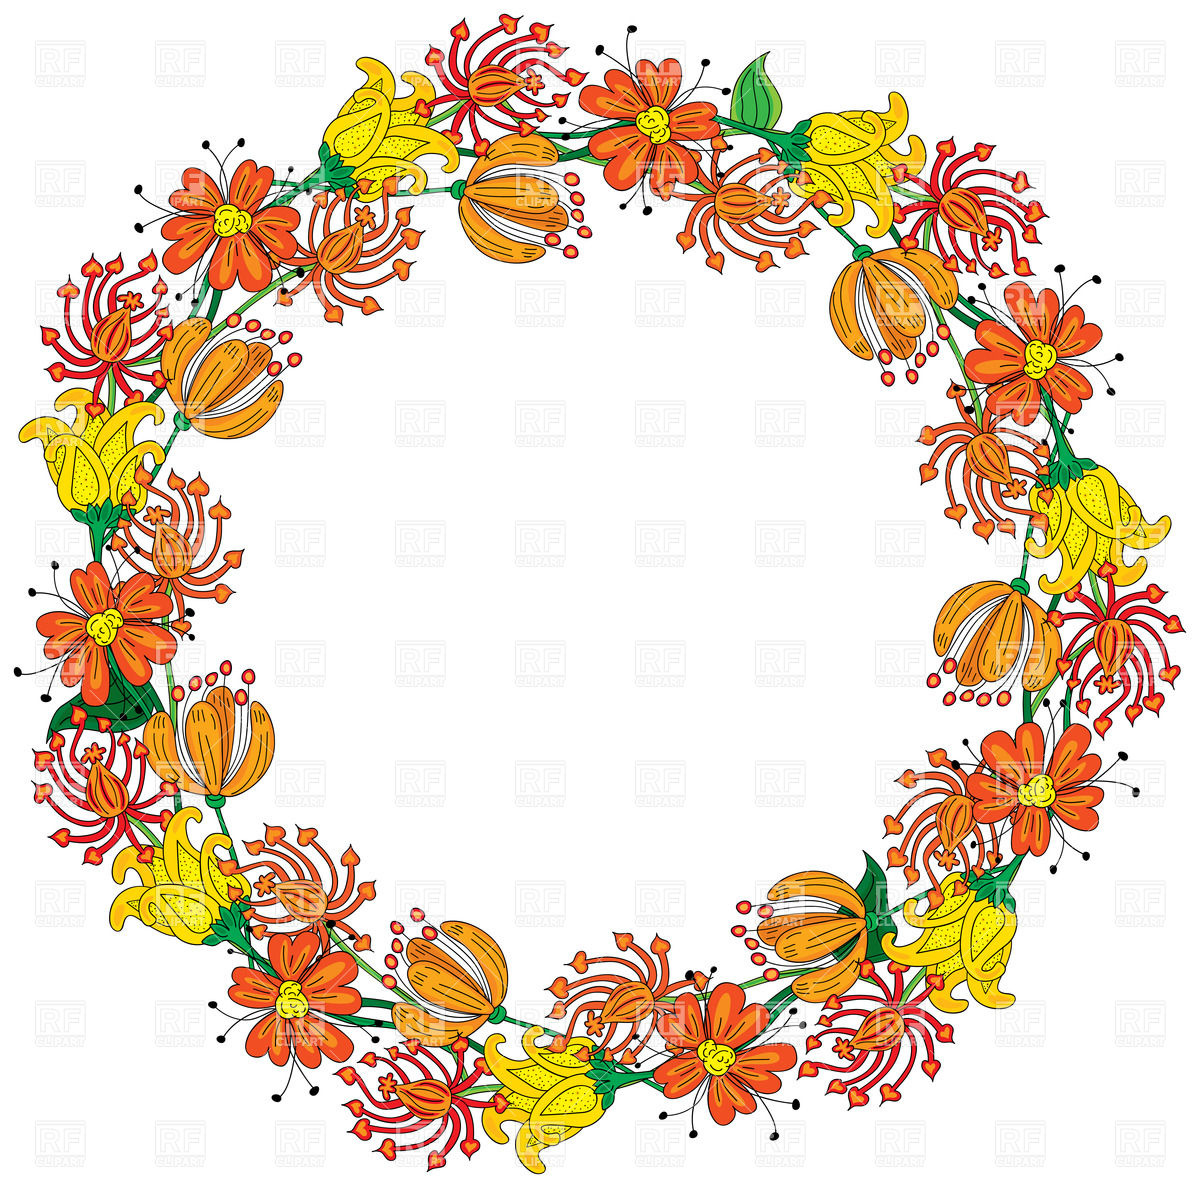 Wreath 30536 Design Elements Download Royalty Free Vector Clipart